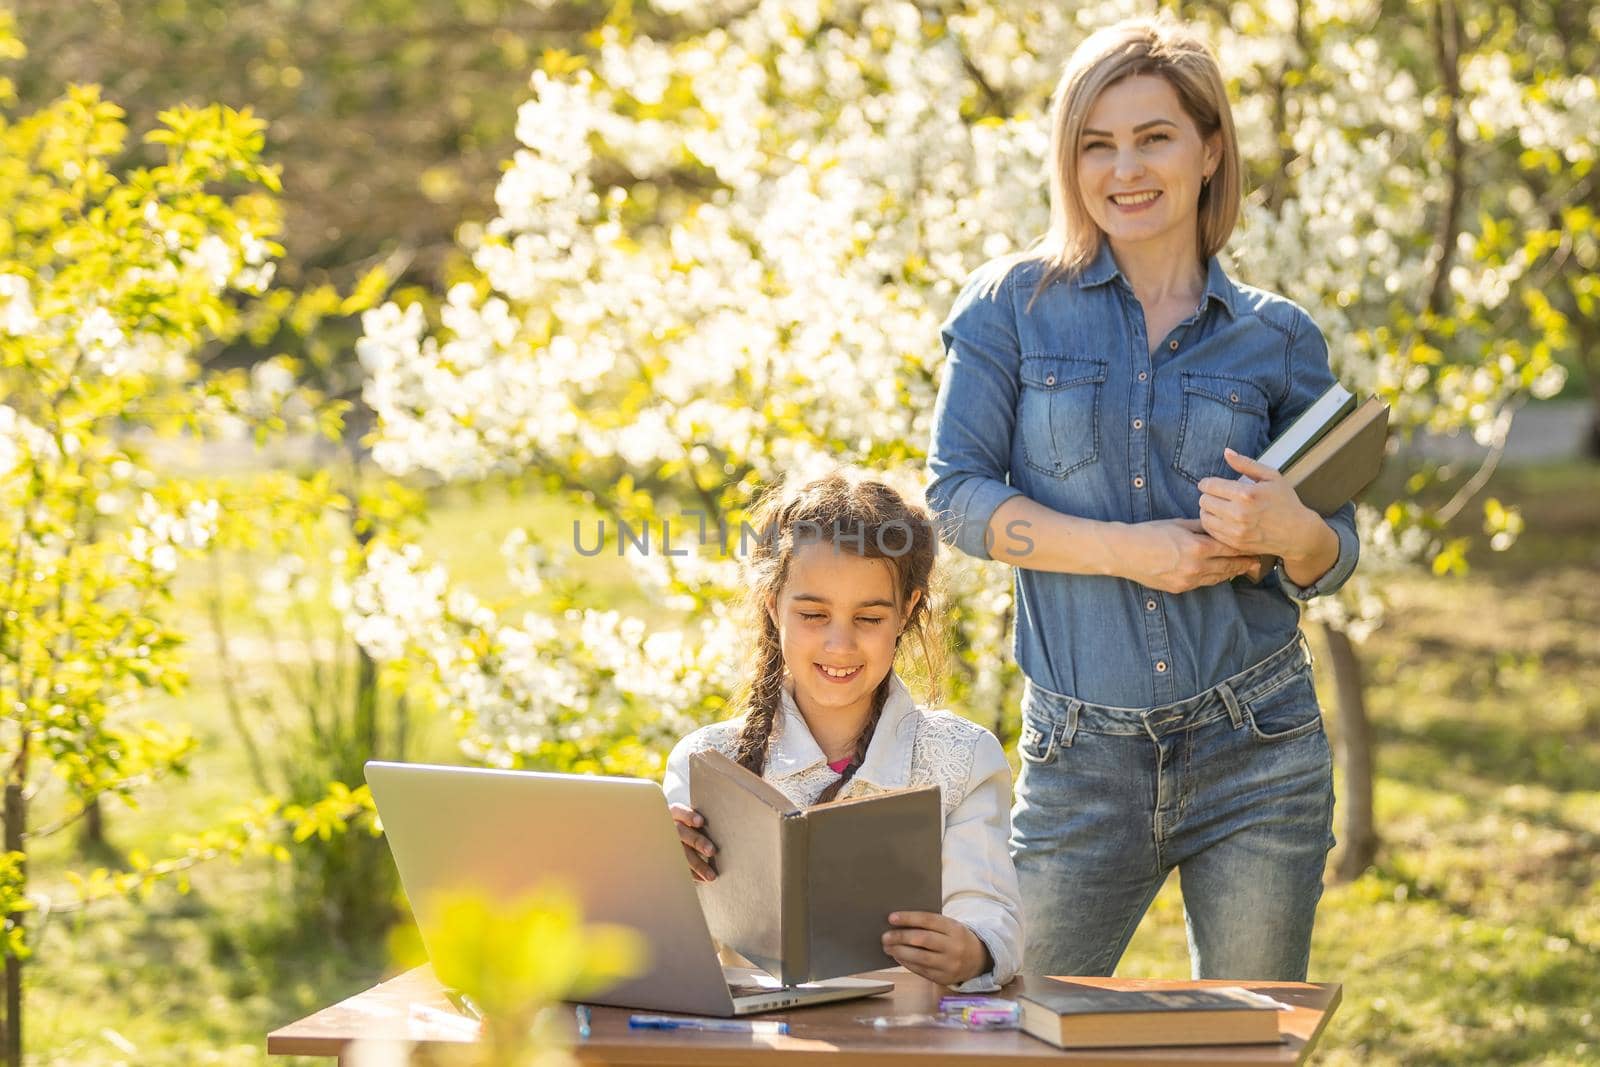 little girl with mom learning on laptop outdoor.